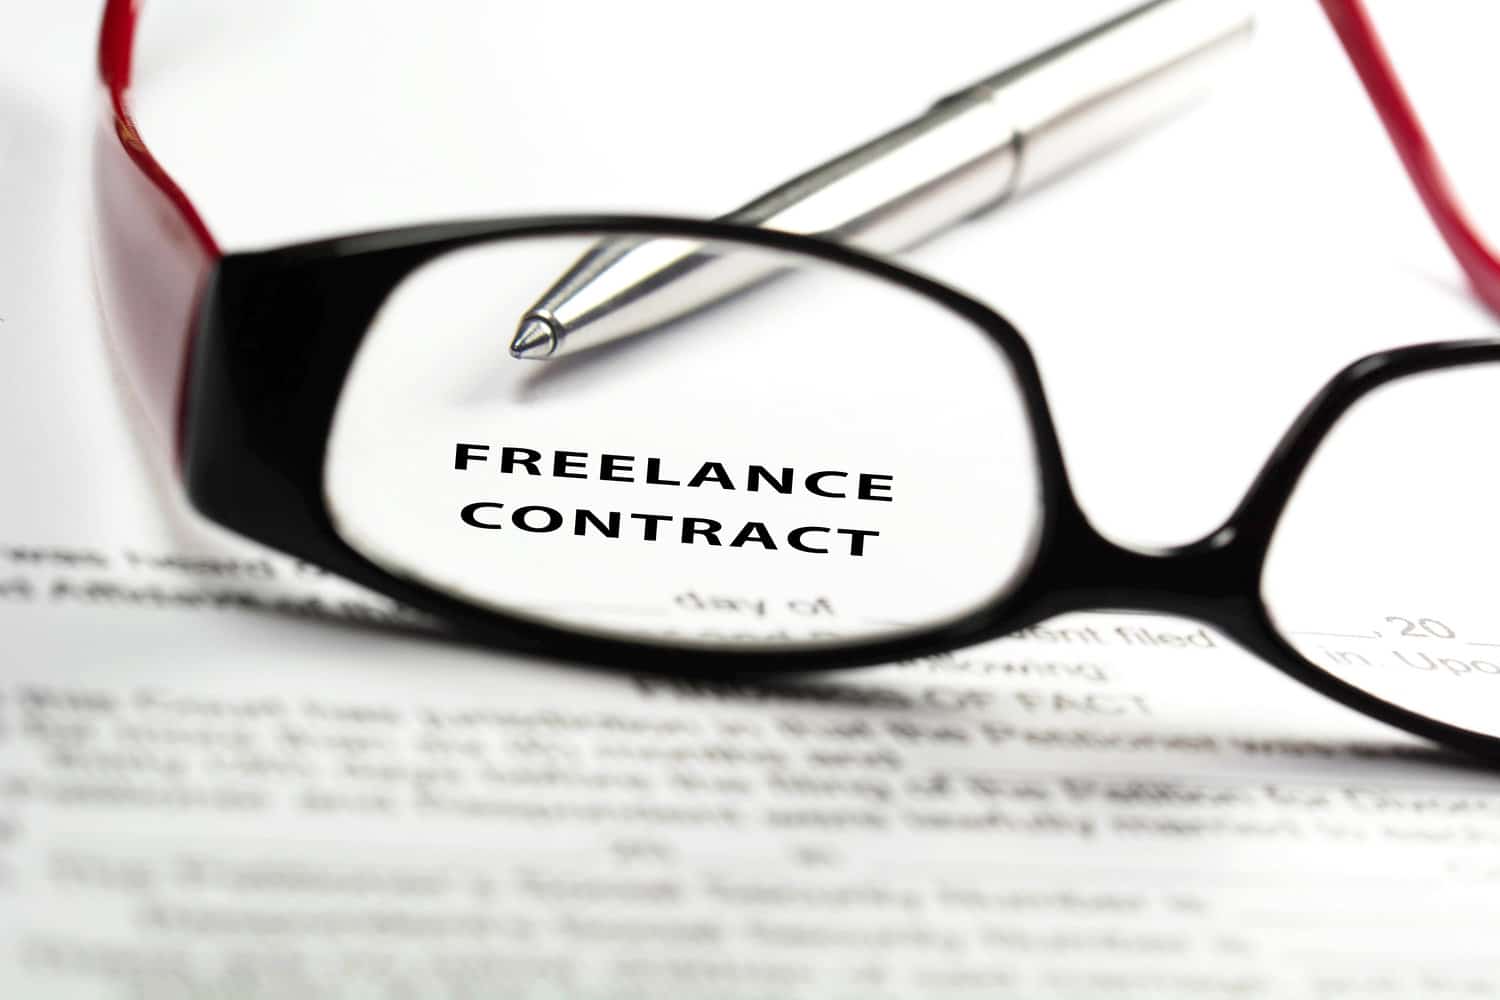 Finding freelance clients means strong contracts